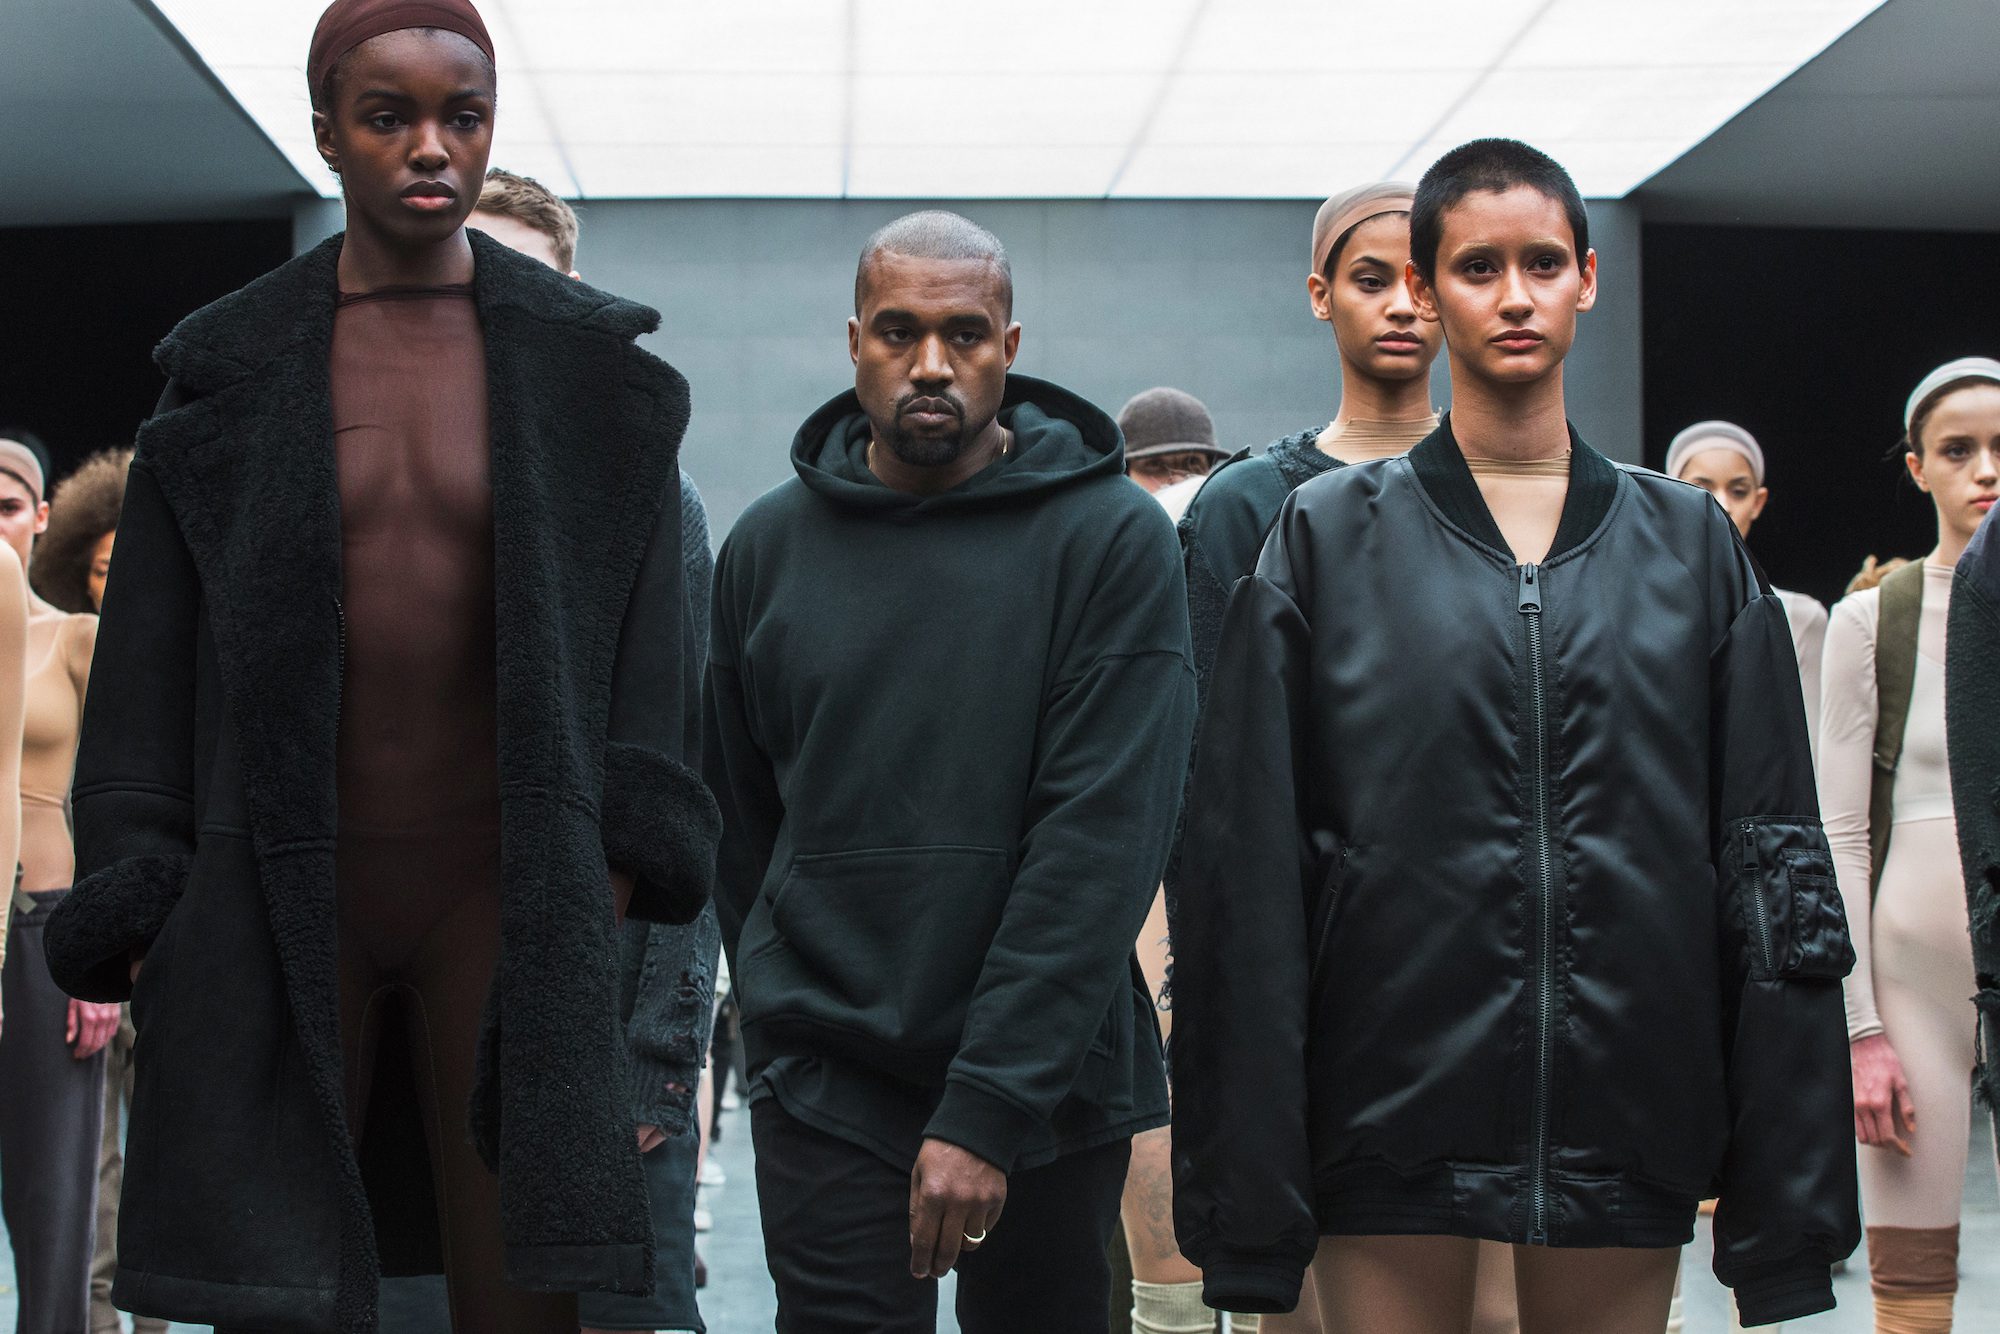 Singer Kanye West walks past models after presenting his Fall/Winter 2015 partnership line with Adidas at New York Fashion Week February 12, 2015. REUTERS/Lucas Jackson/File Photo